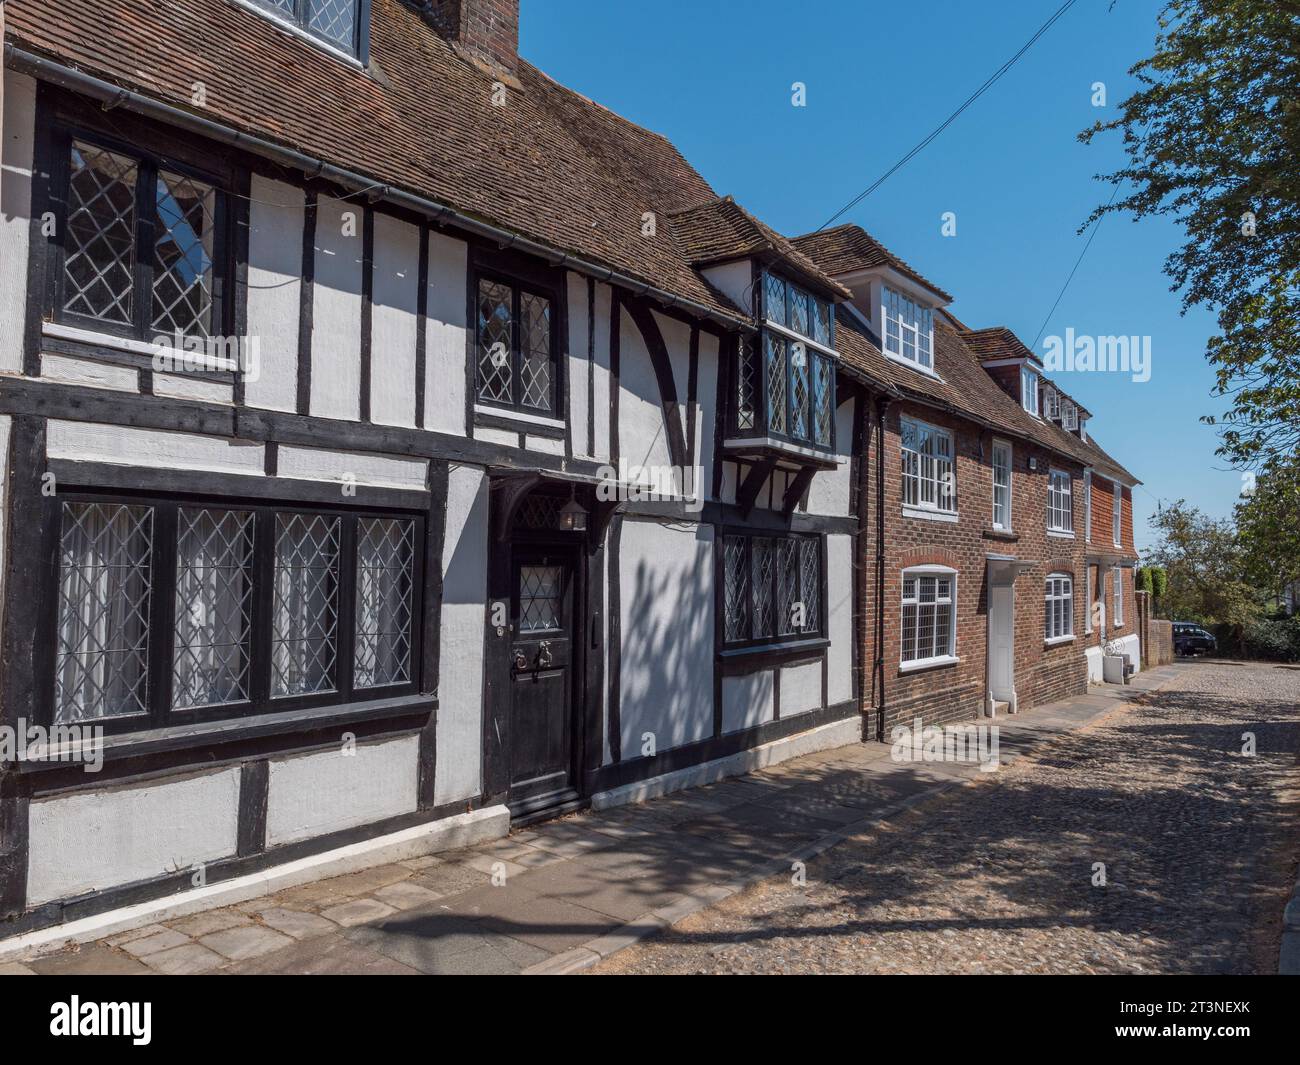 Cottages on Church Square a Rye, East Sussex, Regno Unito. Foto Stock